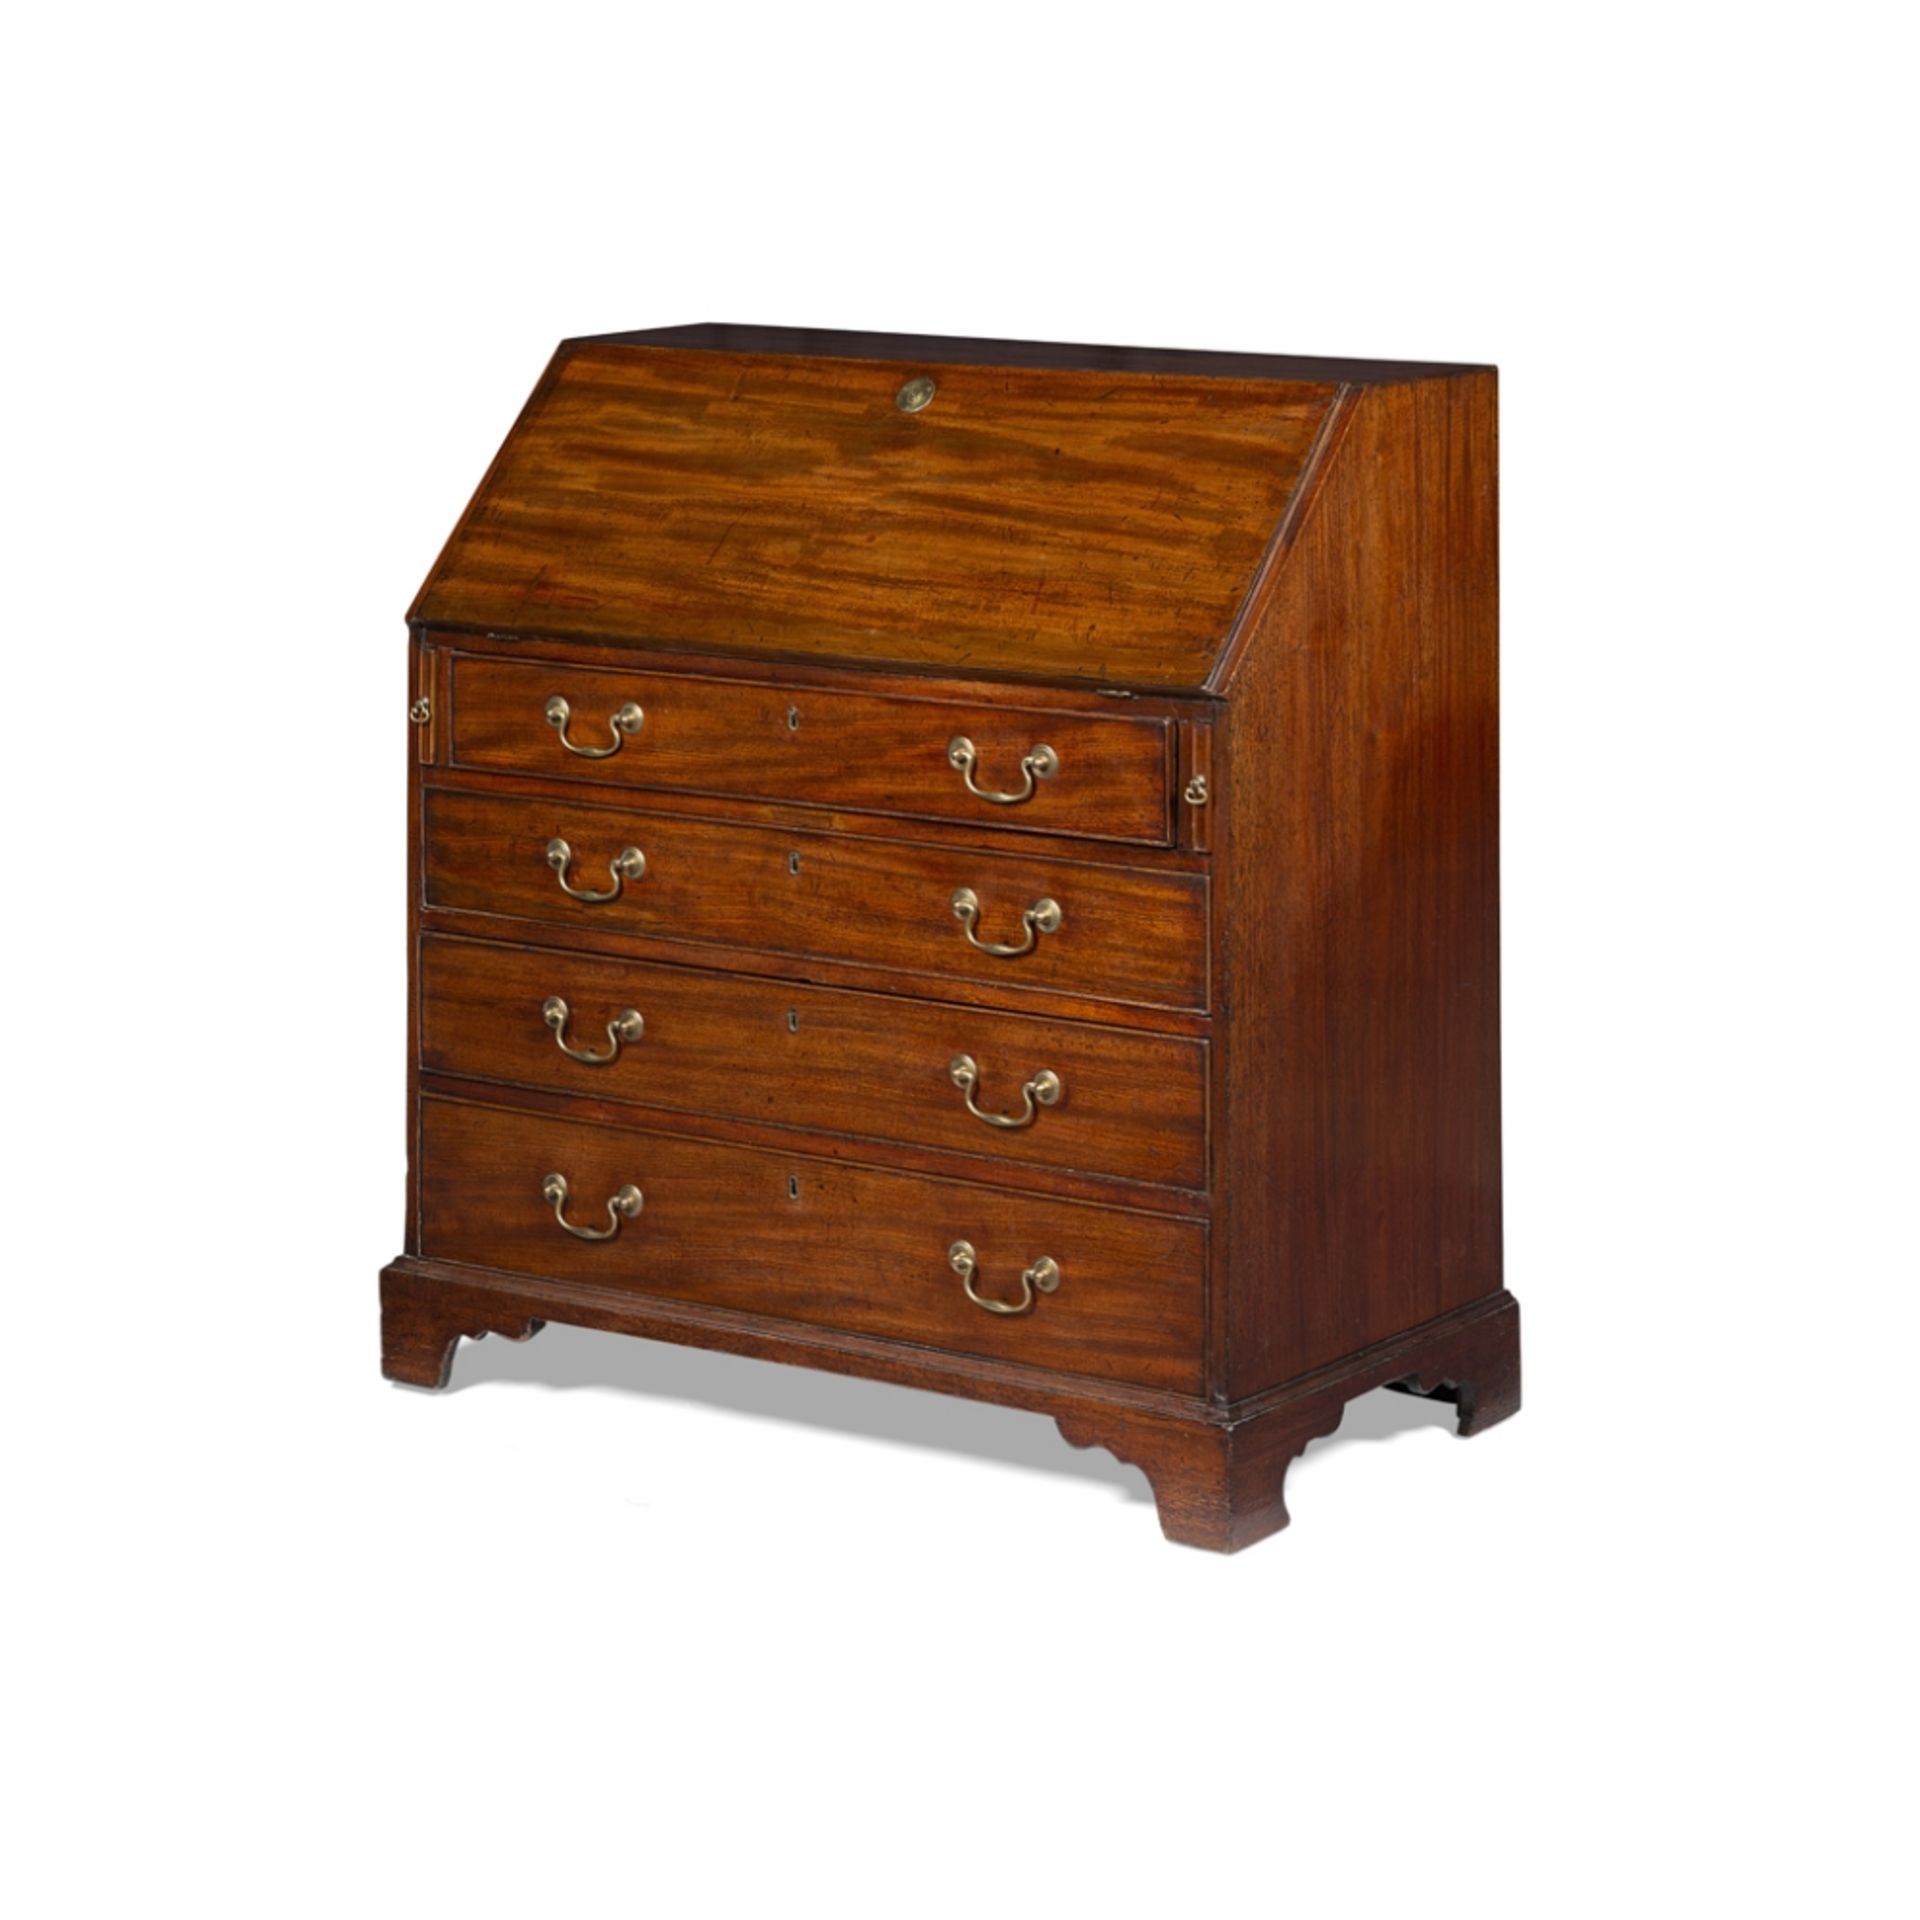 GEORGE III MAHOGANY BUREAU18TH CENTURY the slant front opening to an arrangement of pigeon holes and - Image 2 of 2